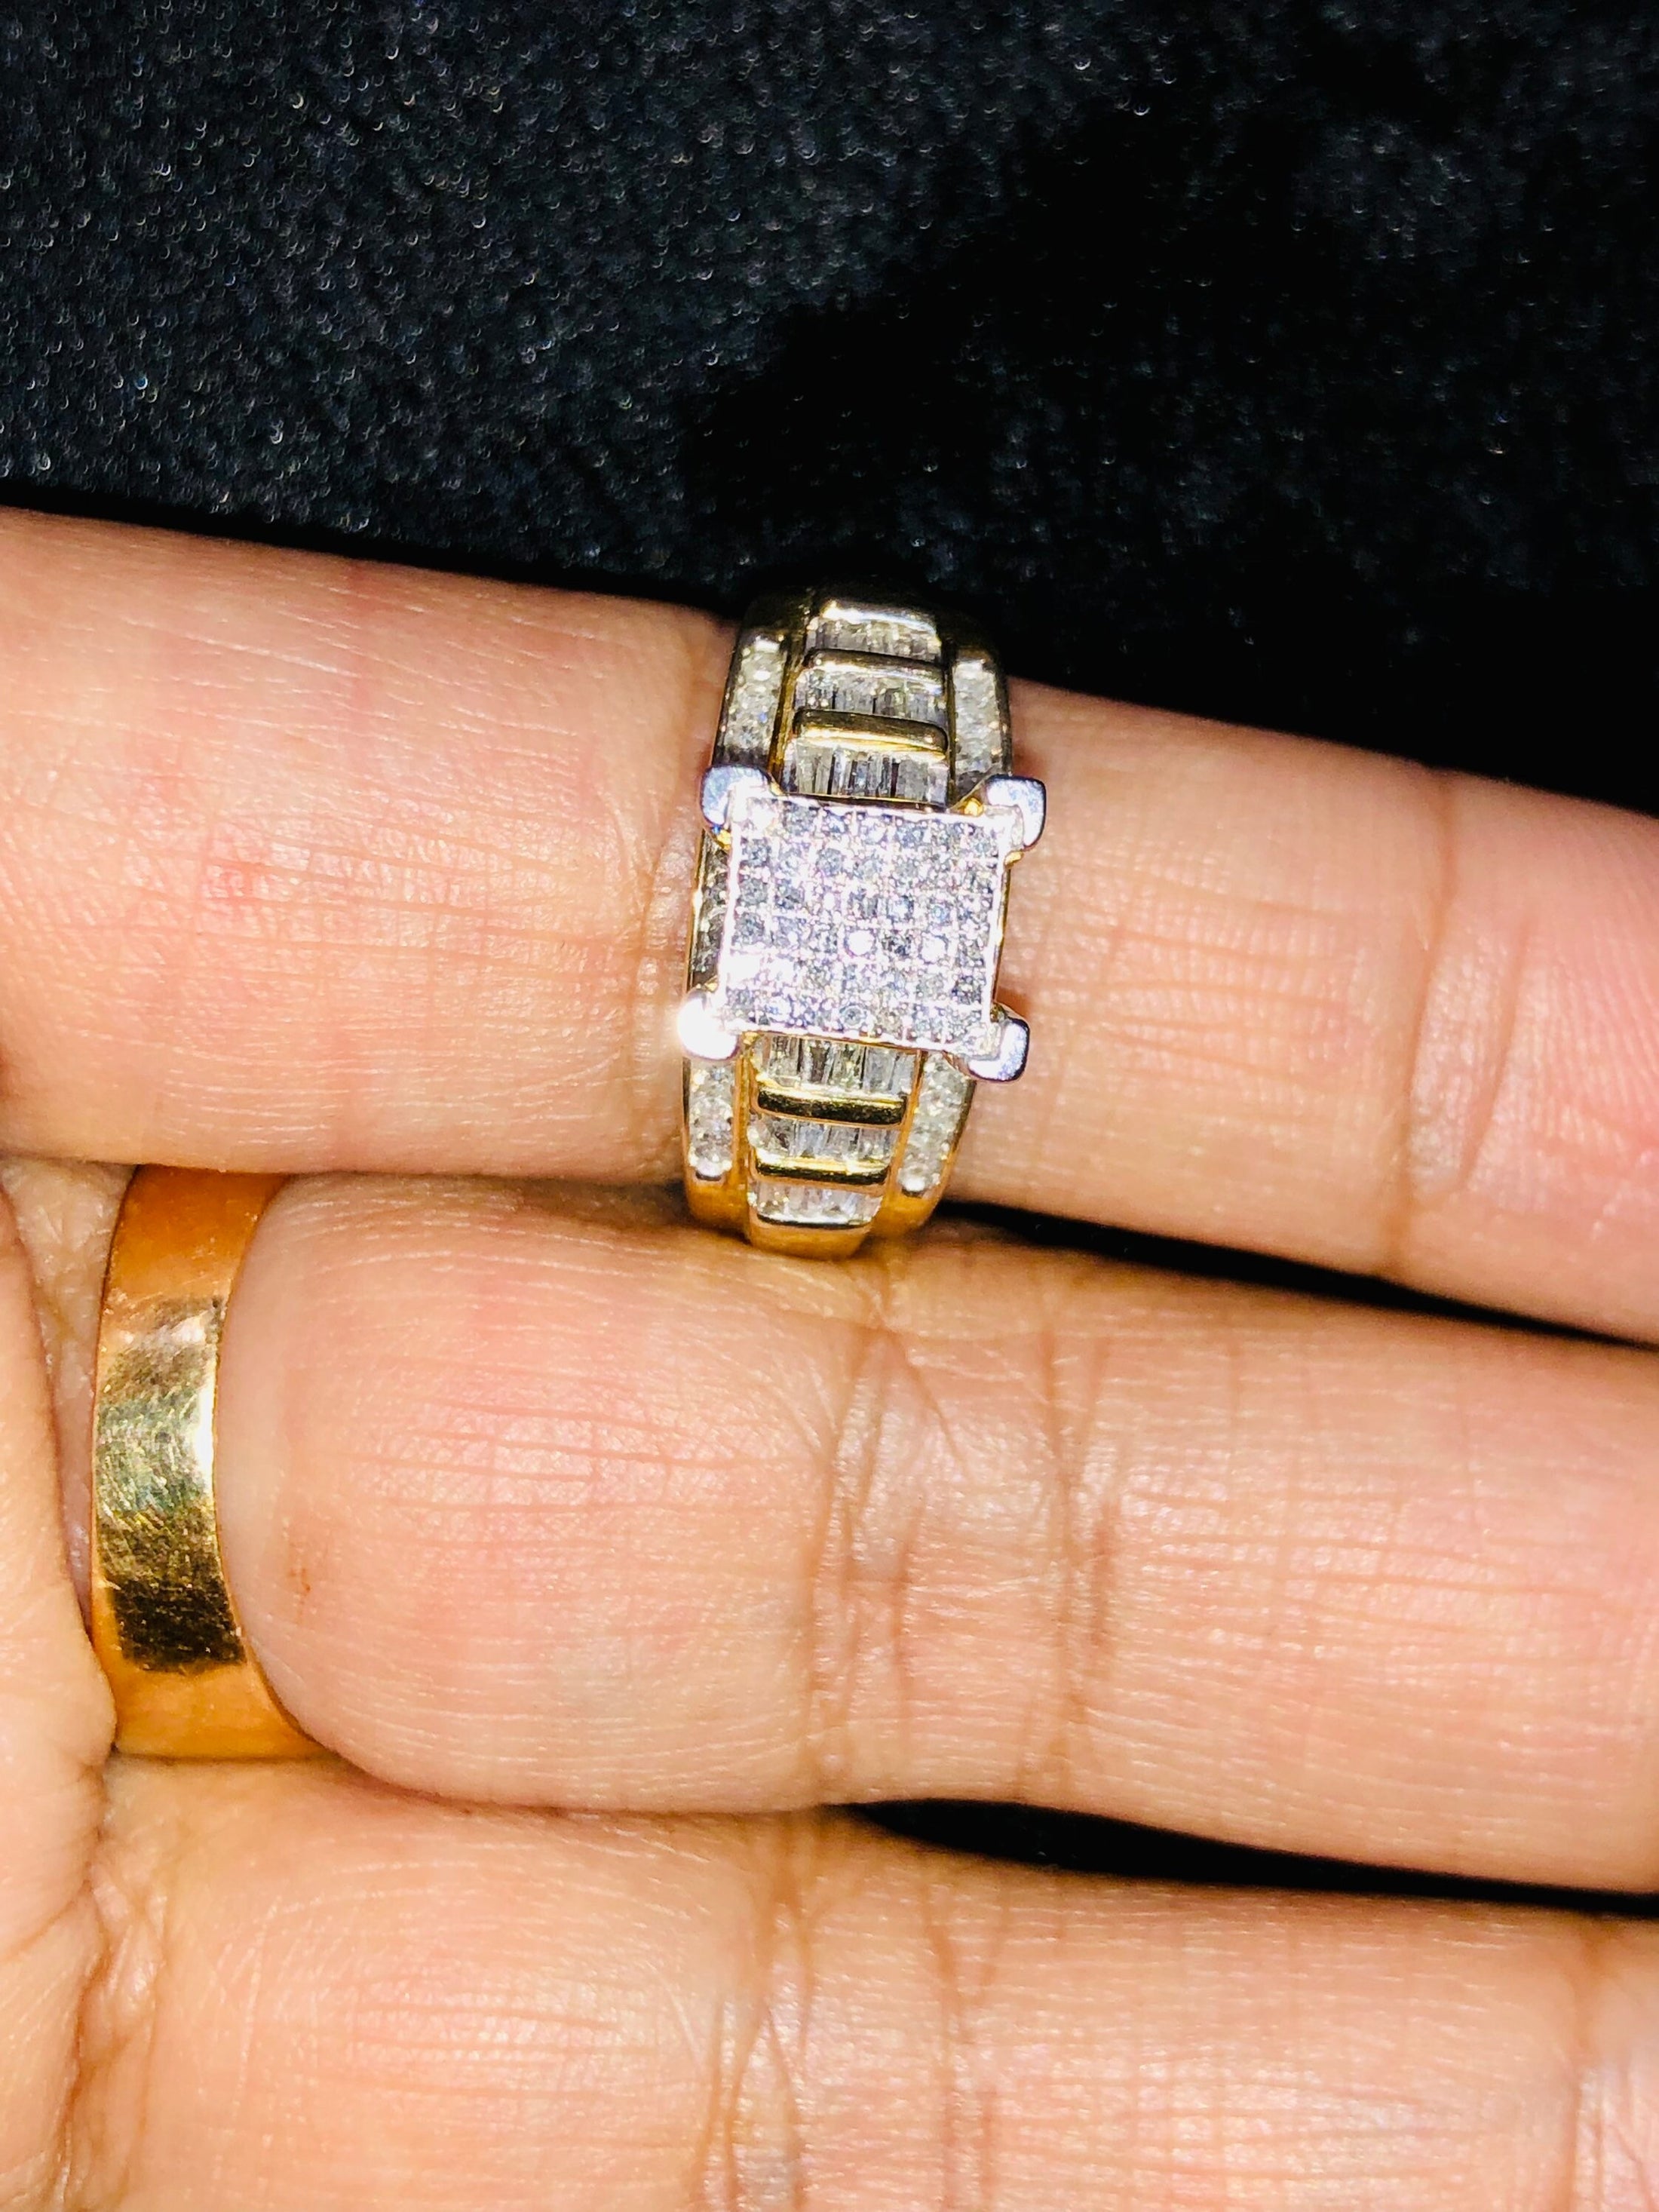 Real diamond bridal engagement designer Cindy collection ring .66ct natural diamonds NOT CZ not moissanite! So beautiful head turner! Sale